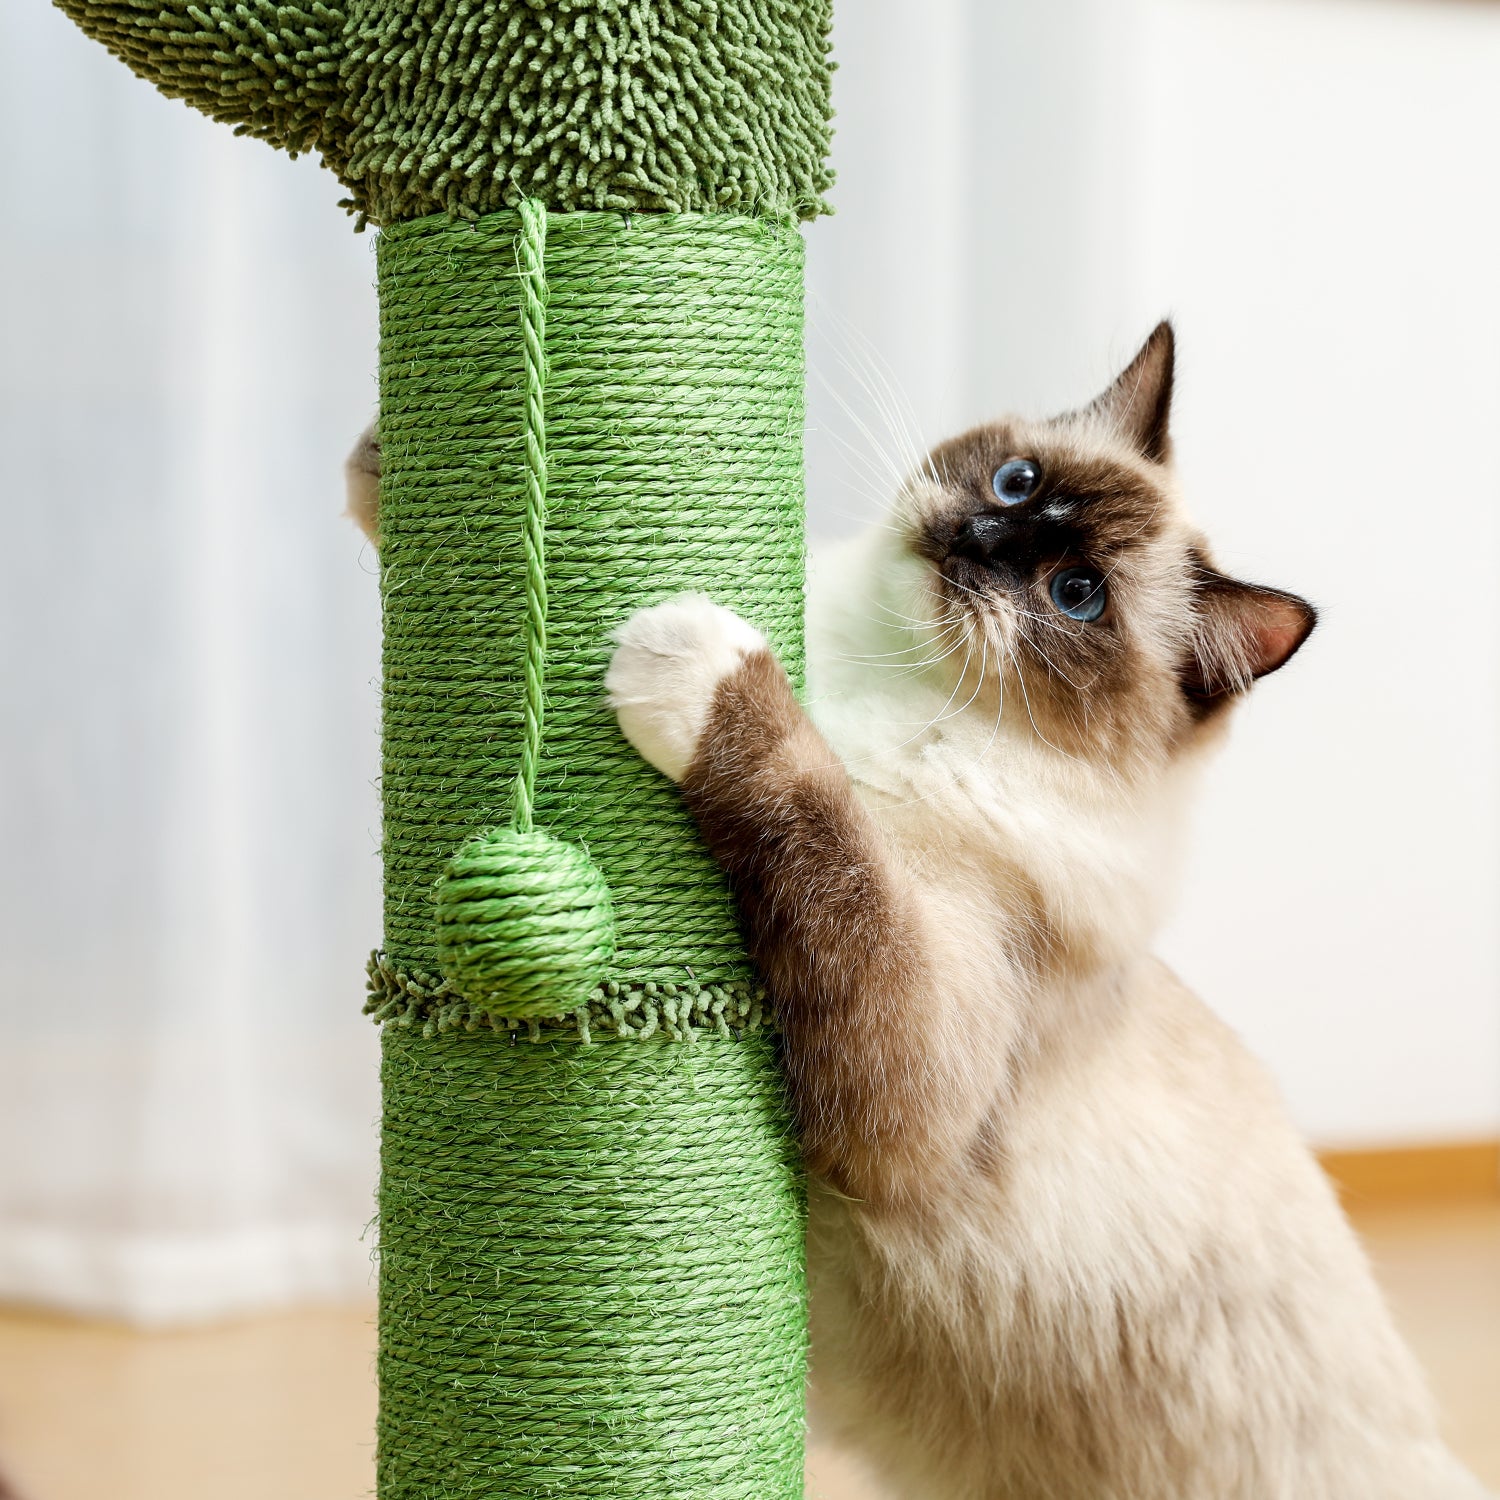 Cactus Cat Tree Cat Scratcher with Sisal Scratching Post and Interactive Dangling Ball For Indoor Cats Green - TOYSHIP